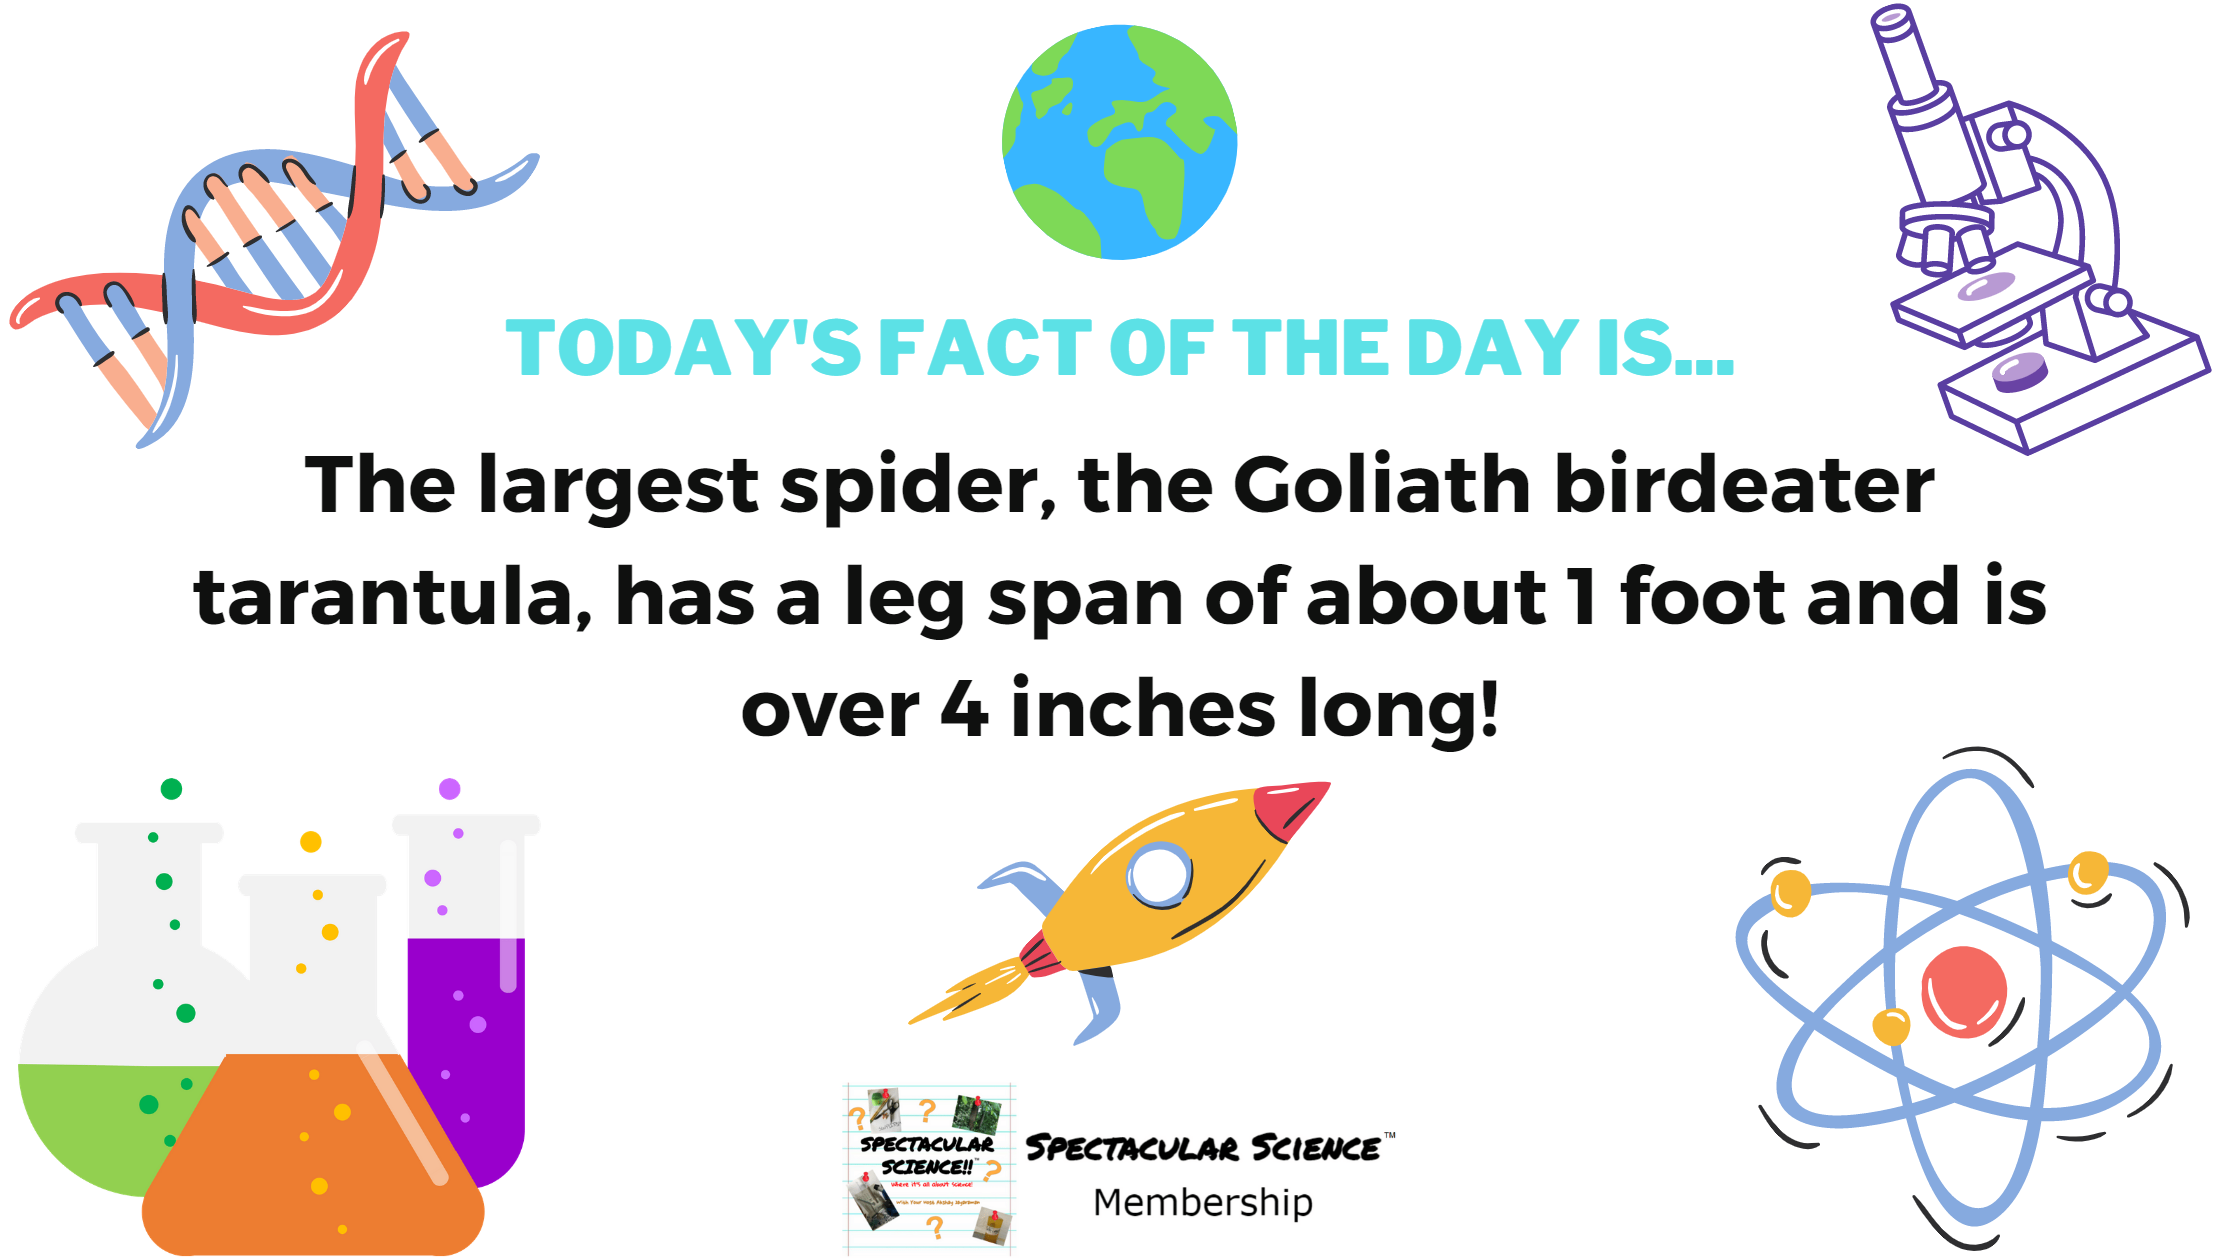 Fact of the Day Image March 12th